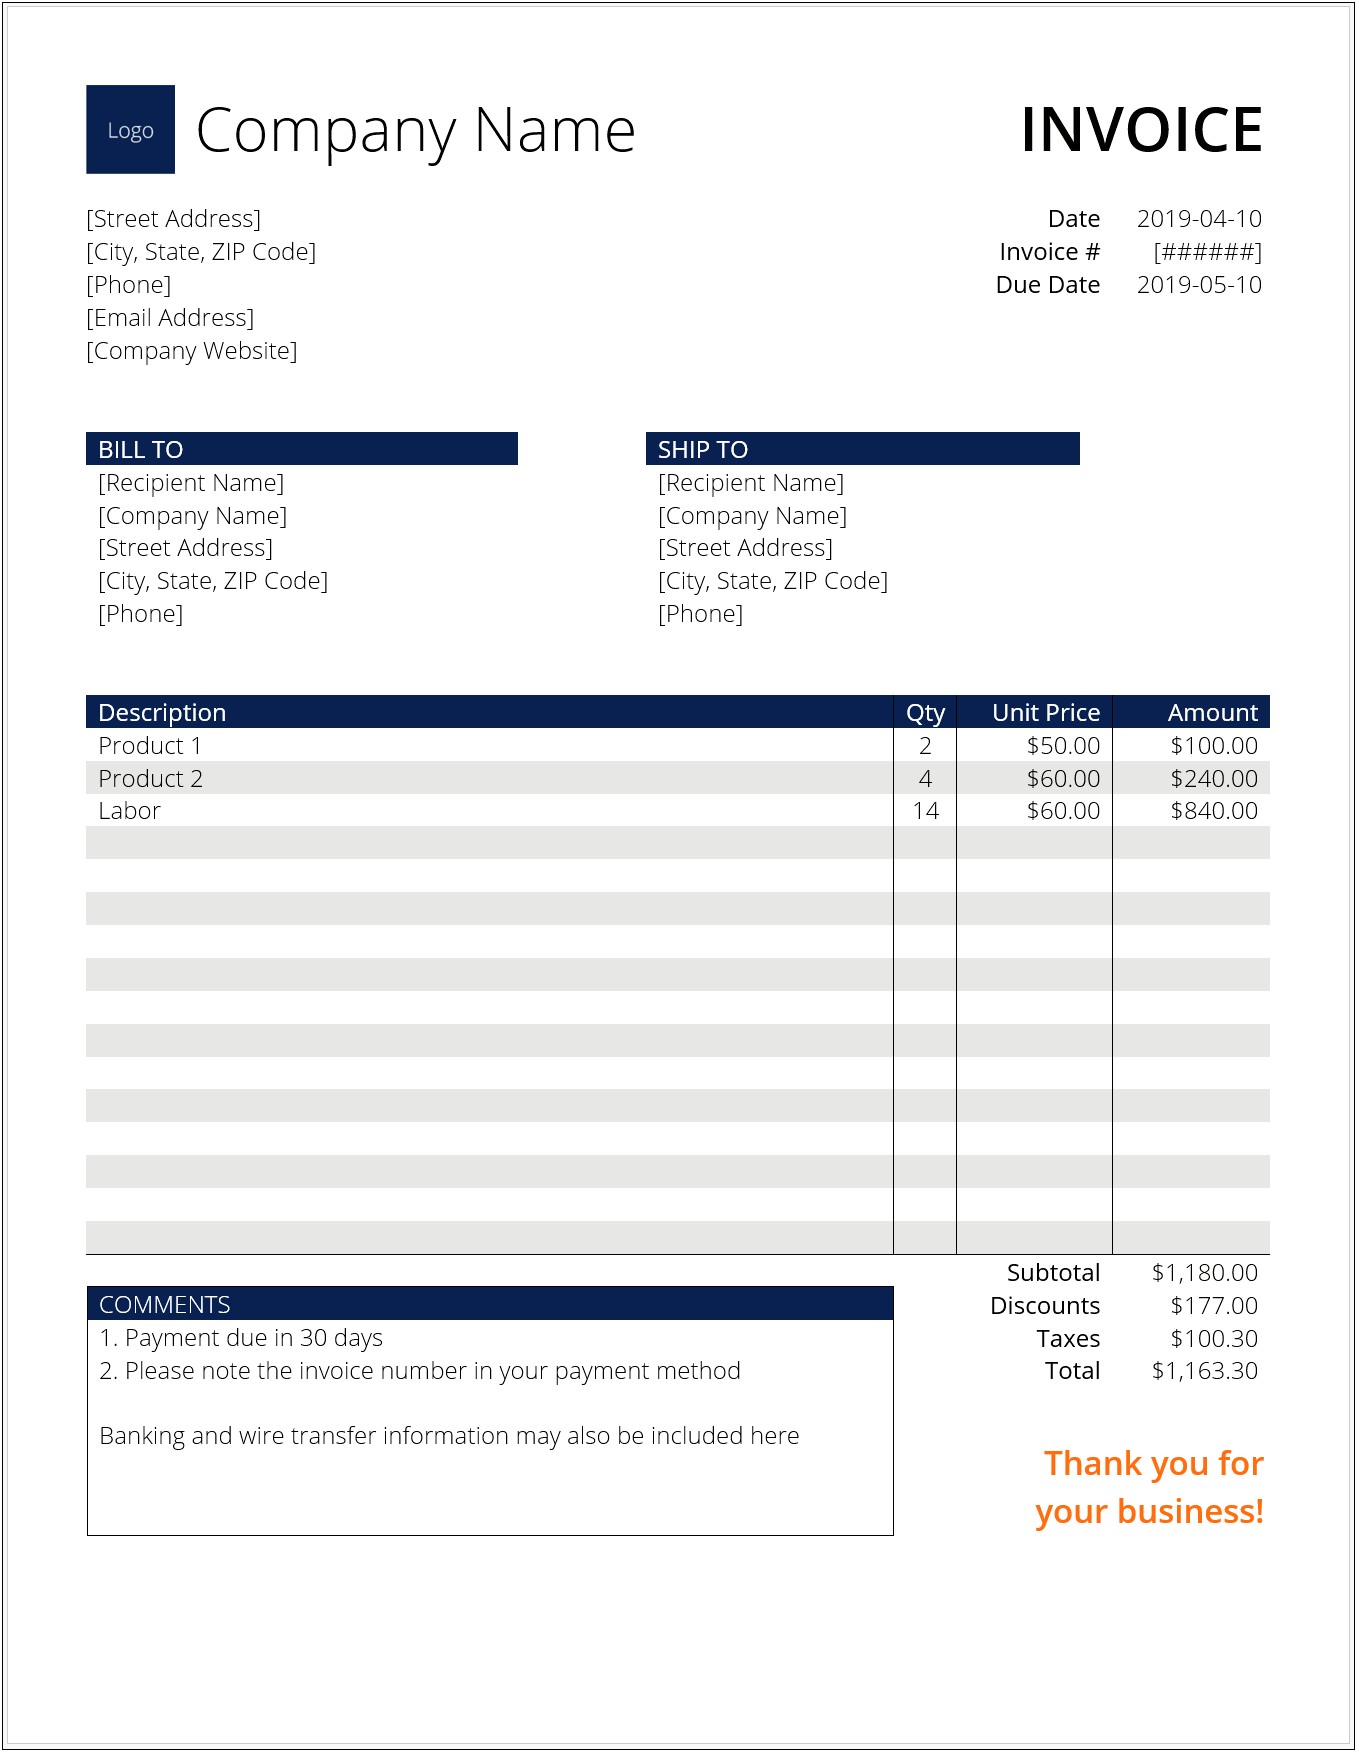 Microsoft Word 2007 Invoice Template Download